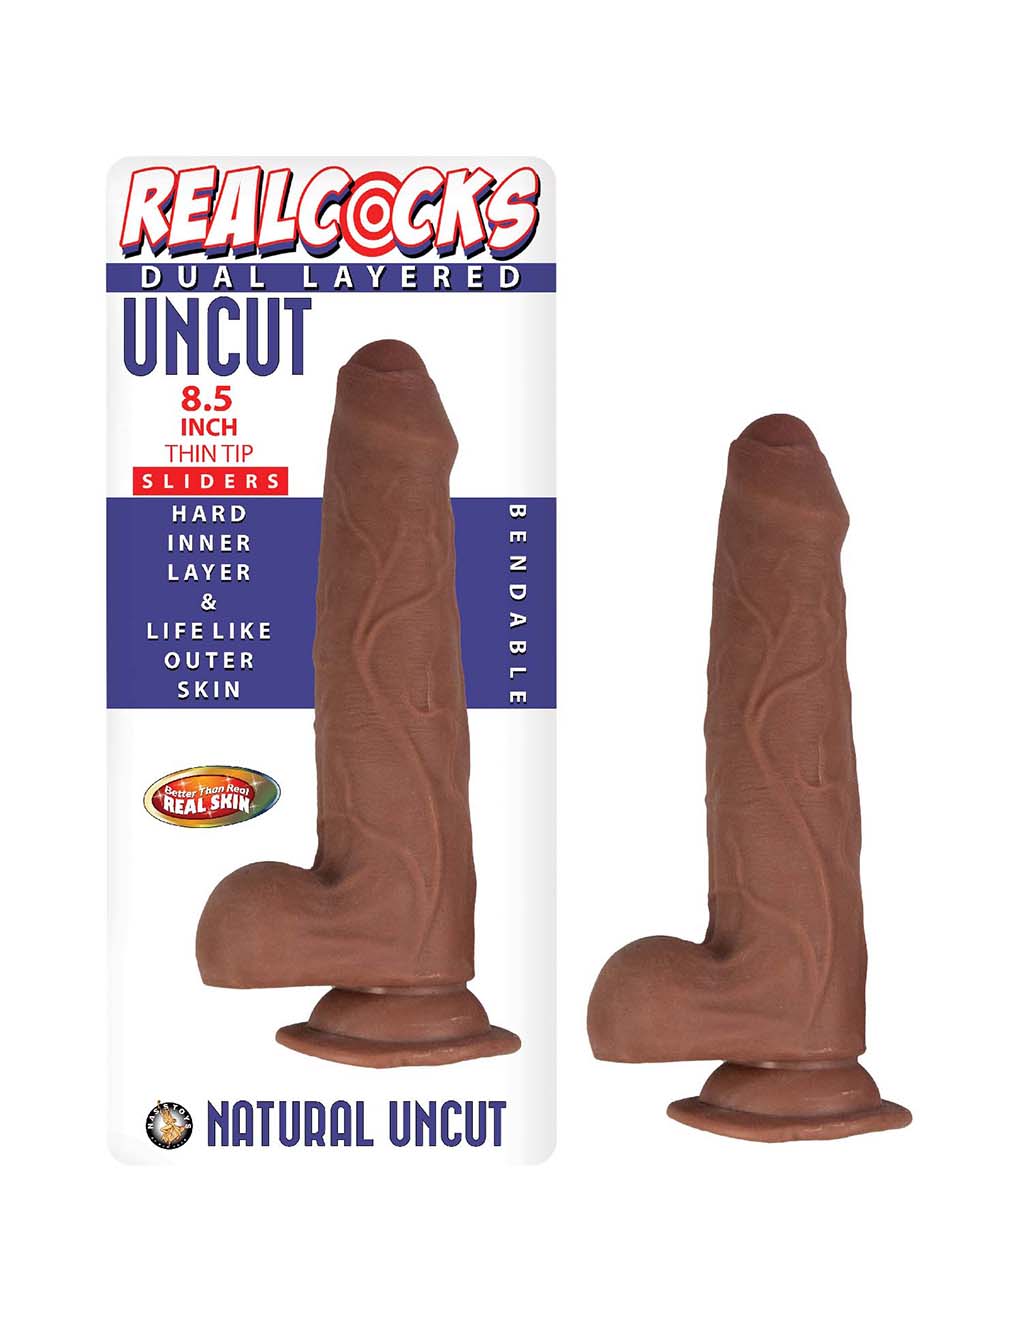 RealCocks Uncut Slider 8.5" Thin Tip- With Box